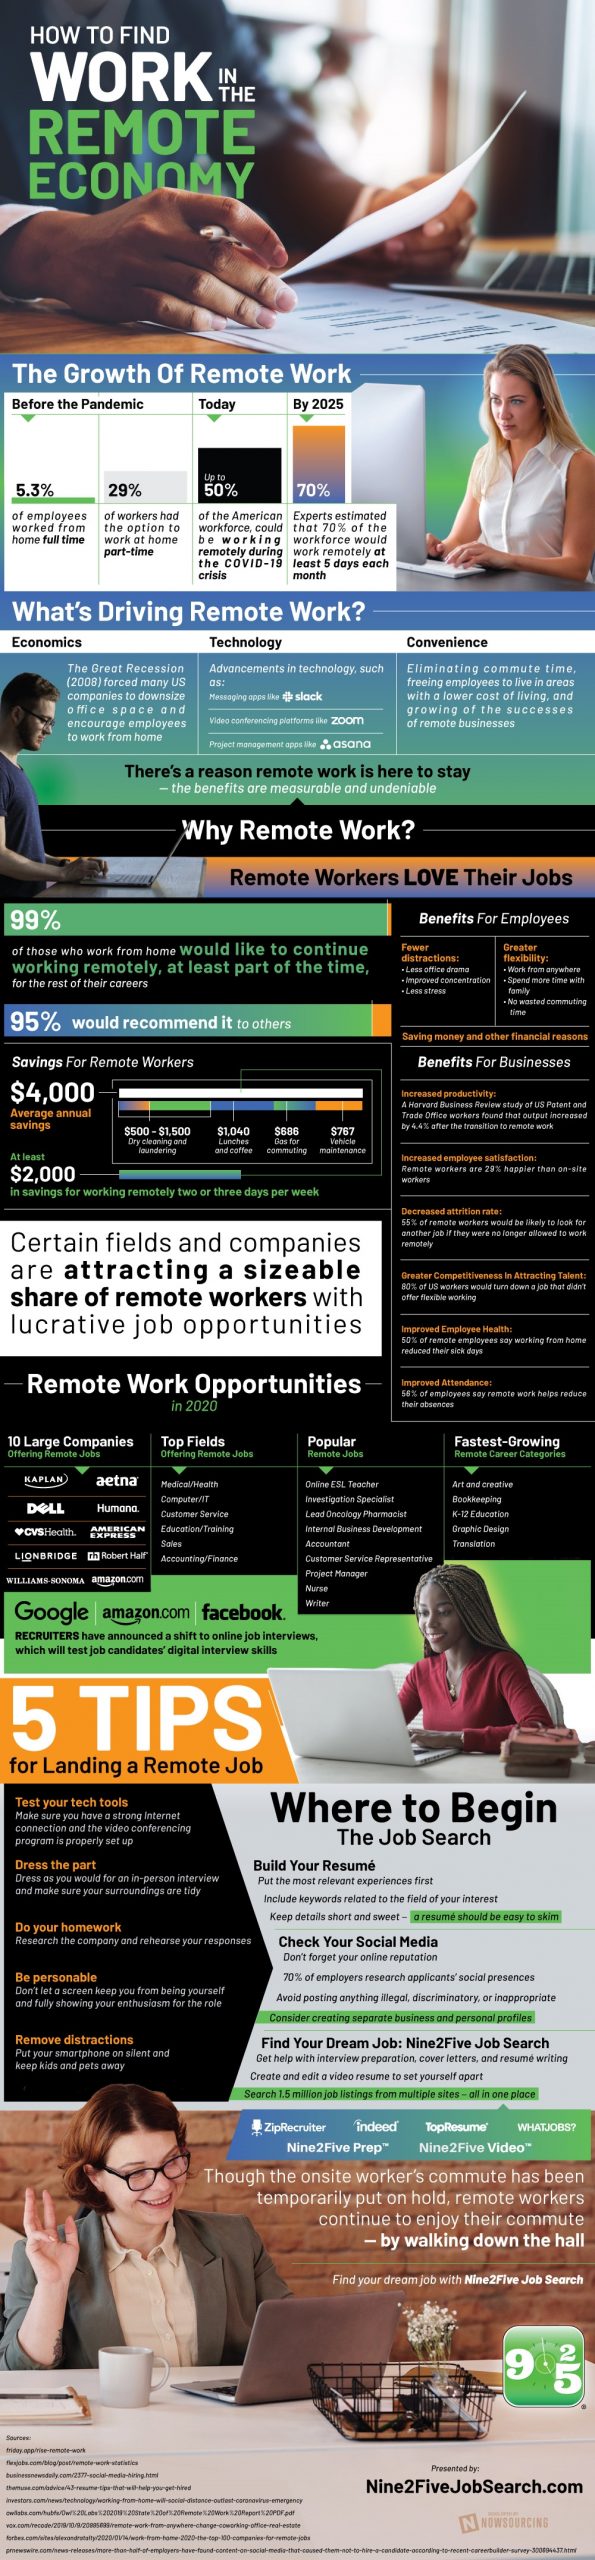 Finding Remote Work [Infographic]